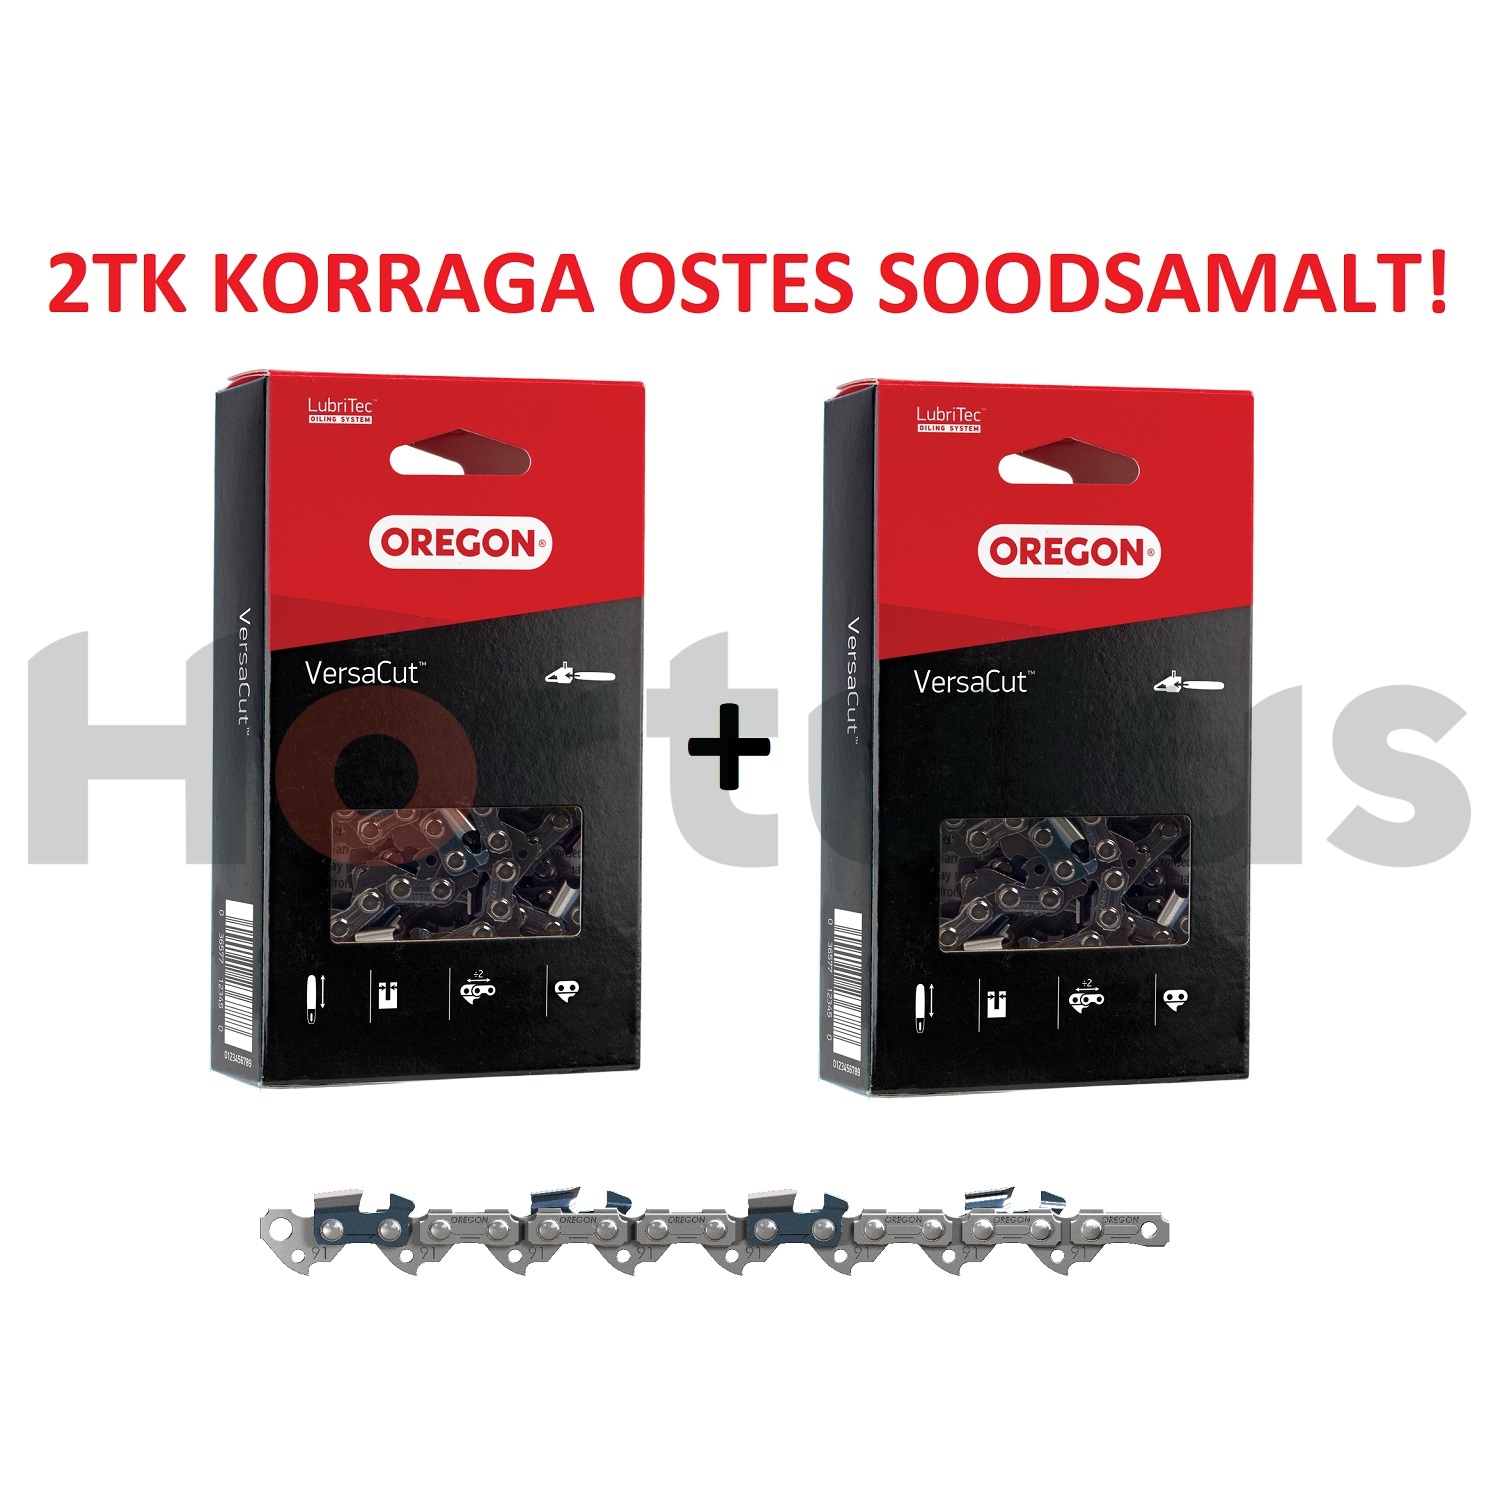 2 saw chains at a discounted price